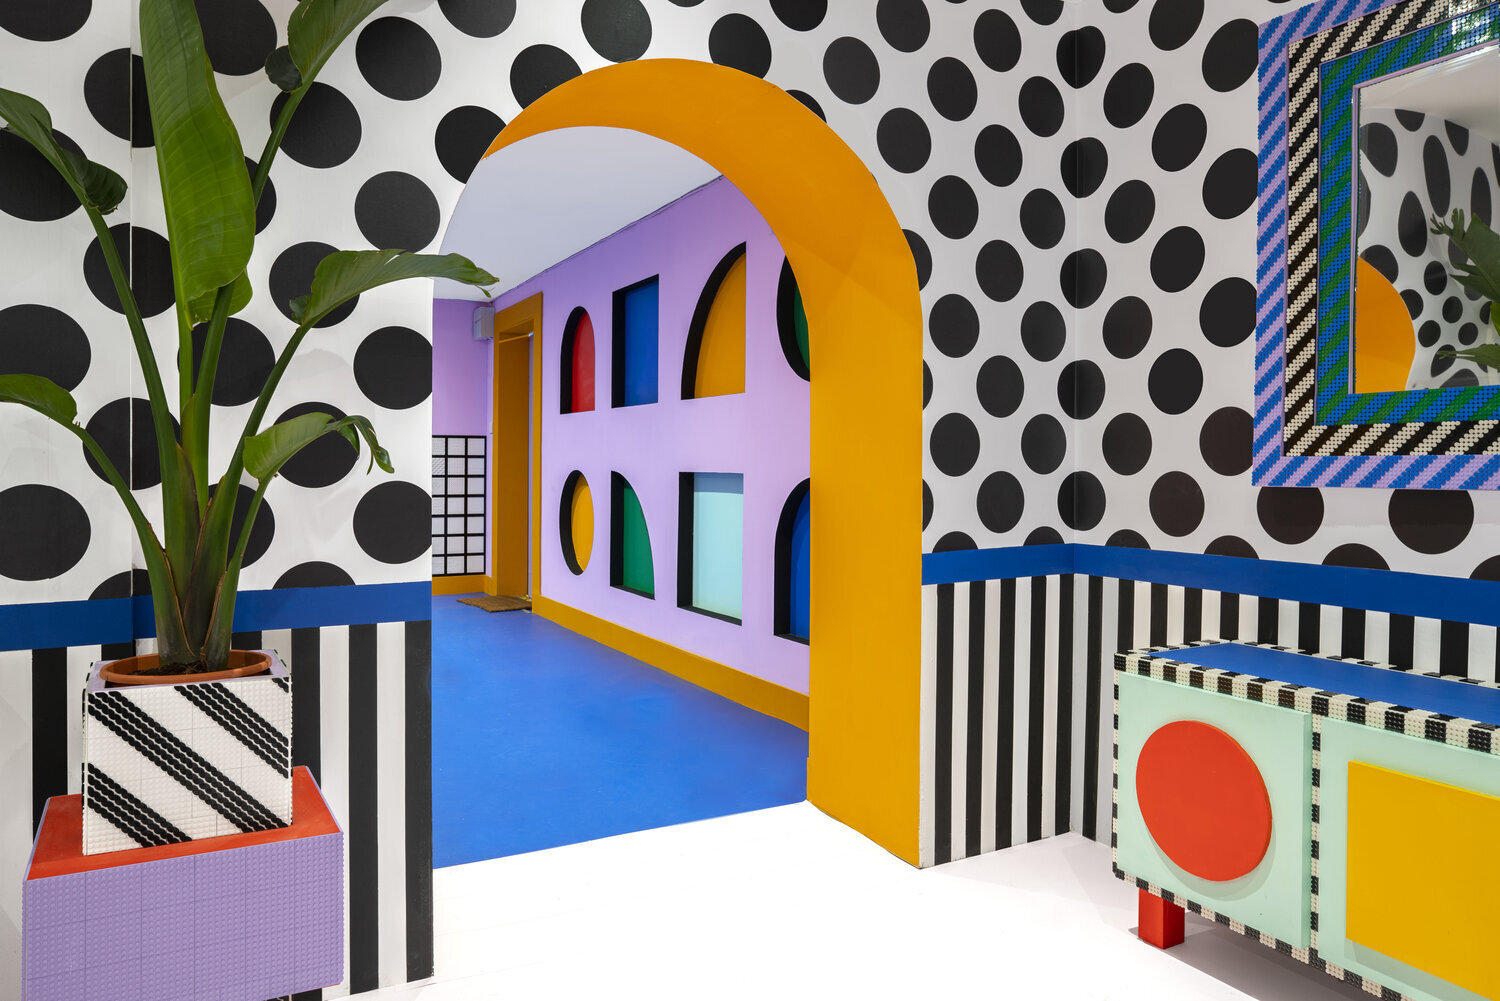 house-of-dots-camille-walala-credit-photo-John-Phillips-Getty-Images-for-the-LEGO-Group.jpg